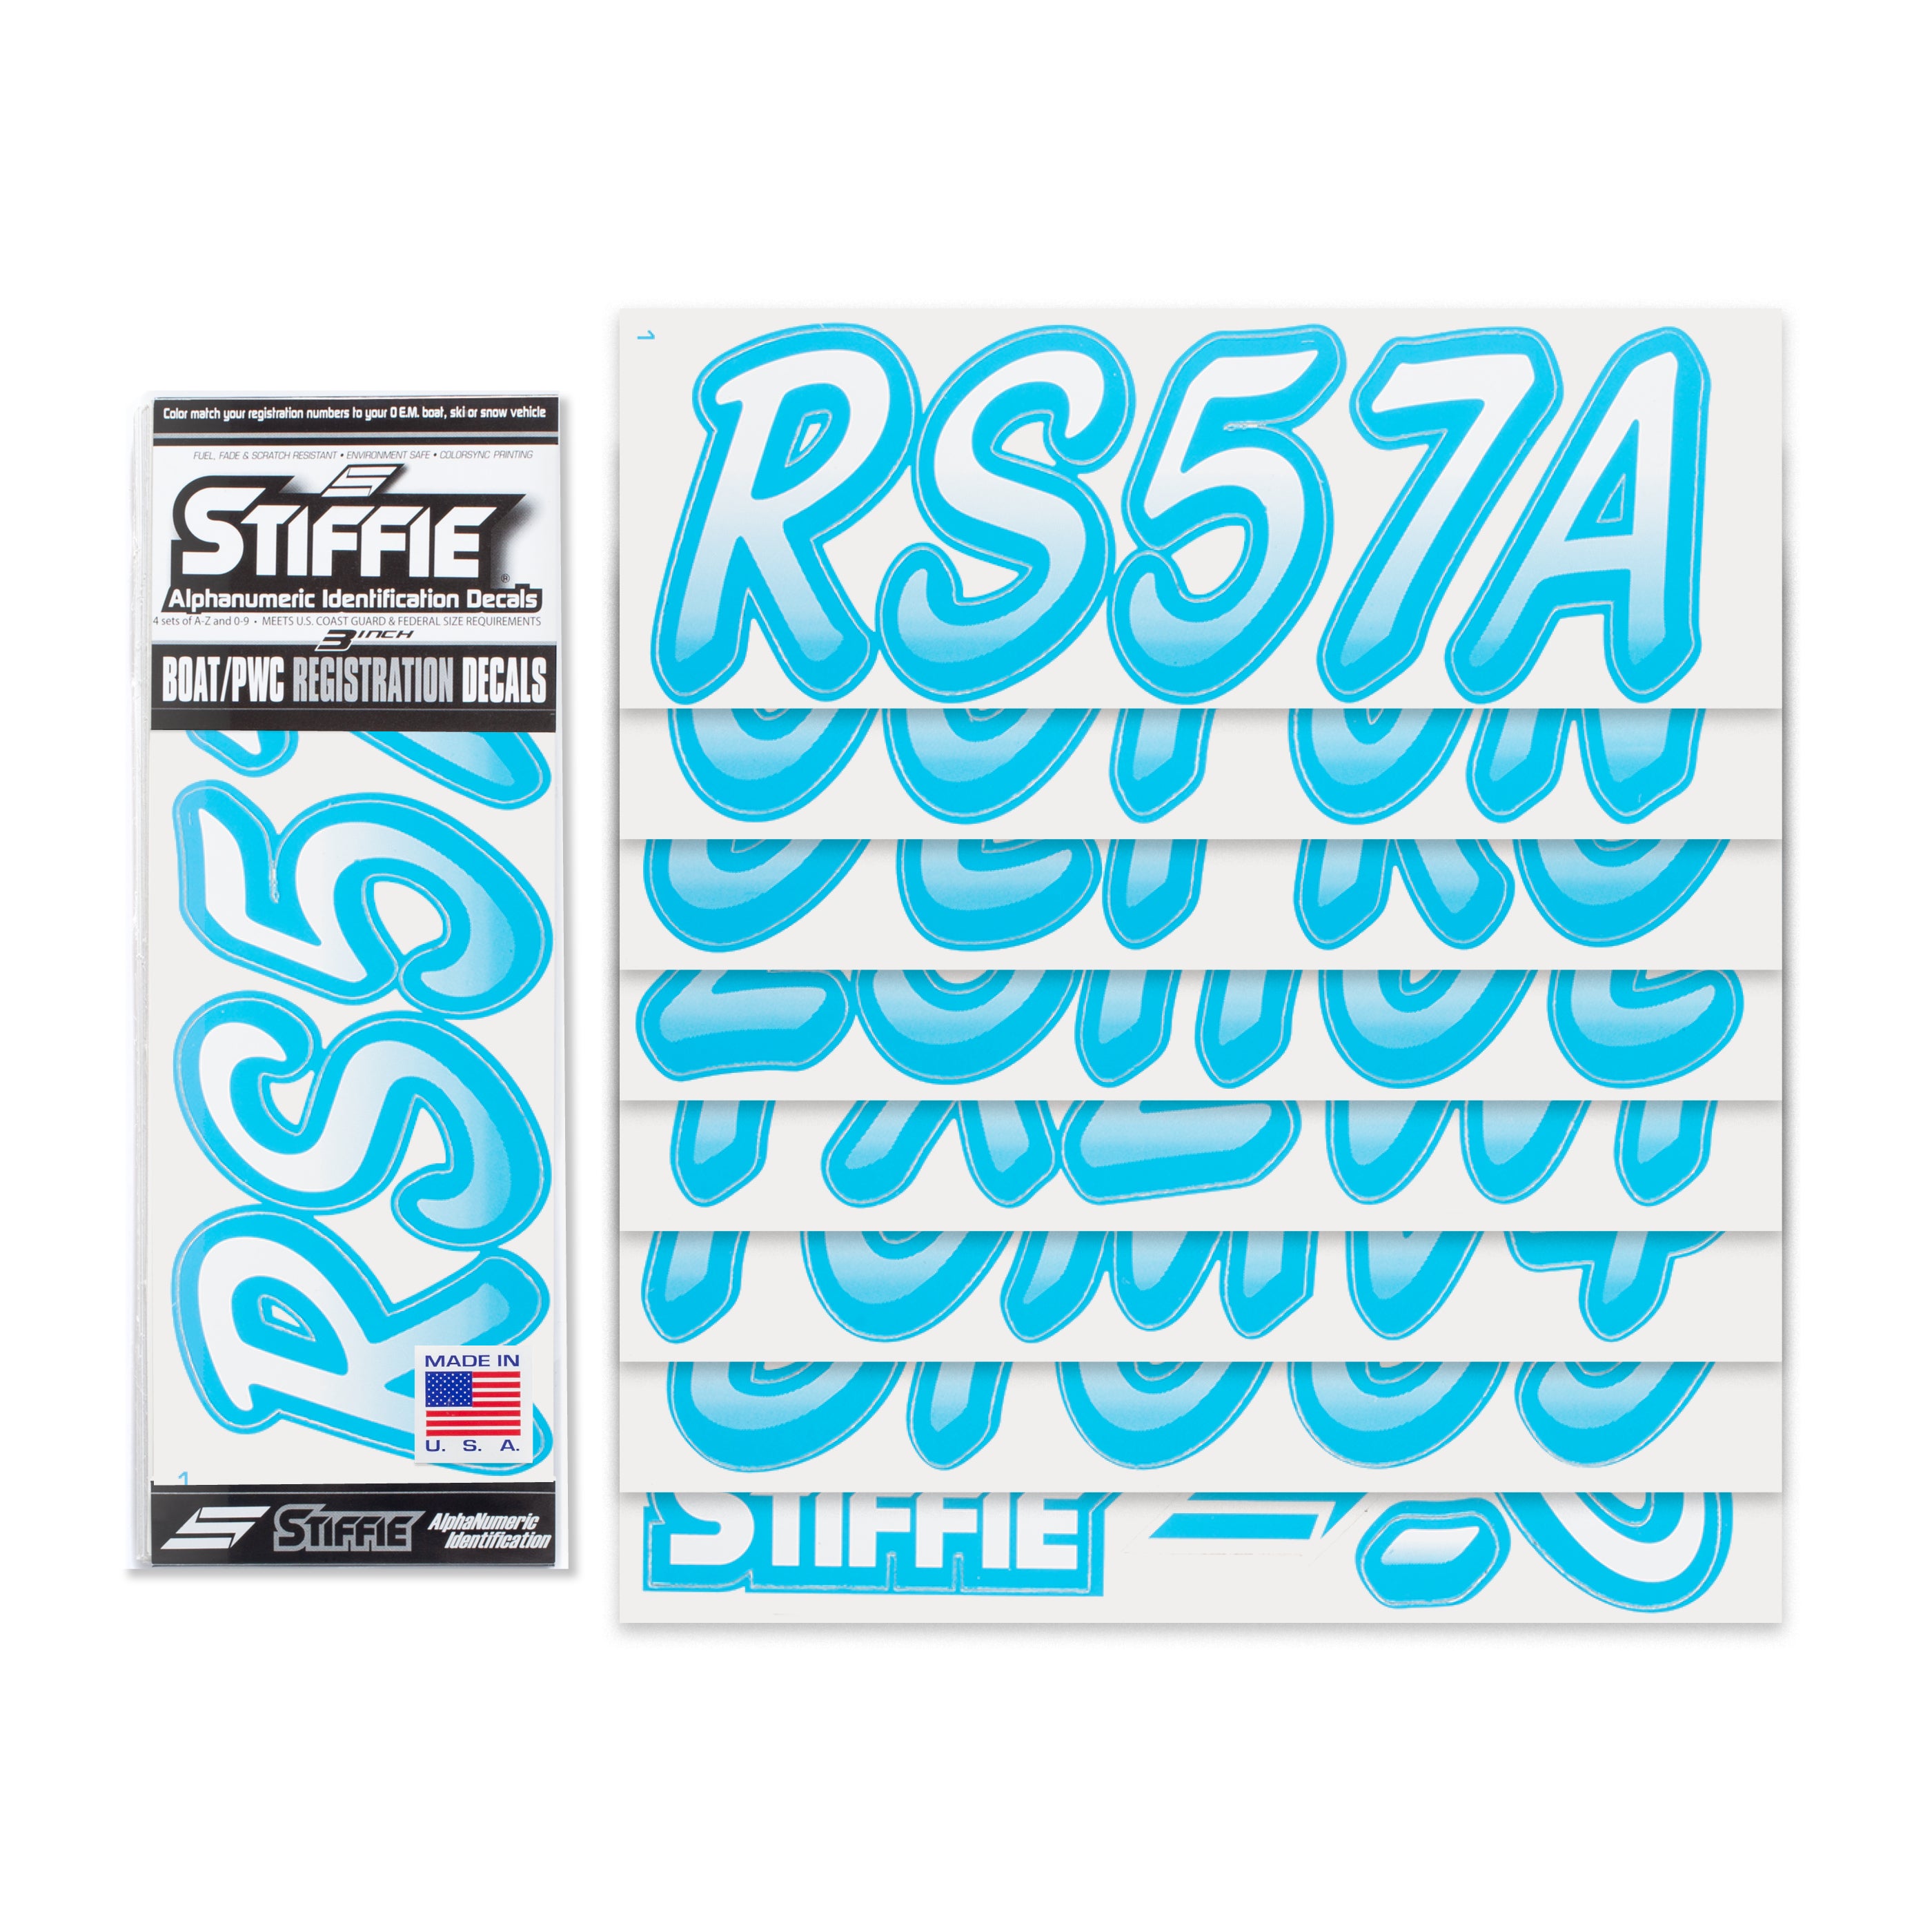 STIFFIE Whipline White/Sky Blue 3" Alpha-Numeric Registration Identification Numbers Stickers Decals for Boats & Personal Watercraft